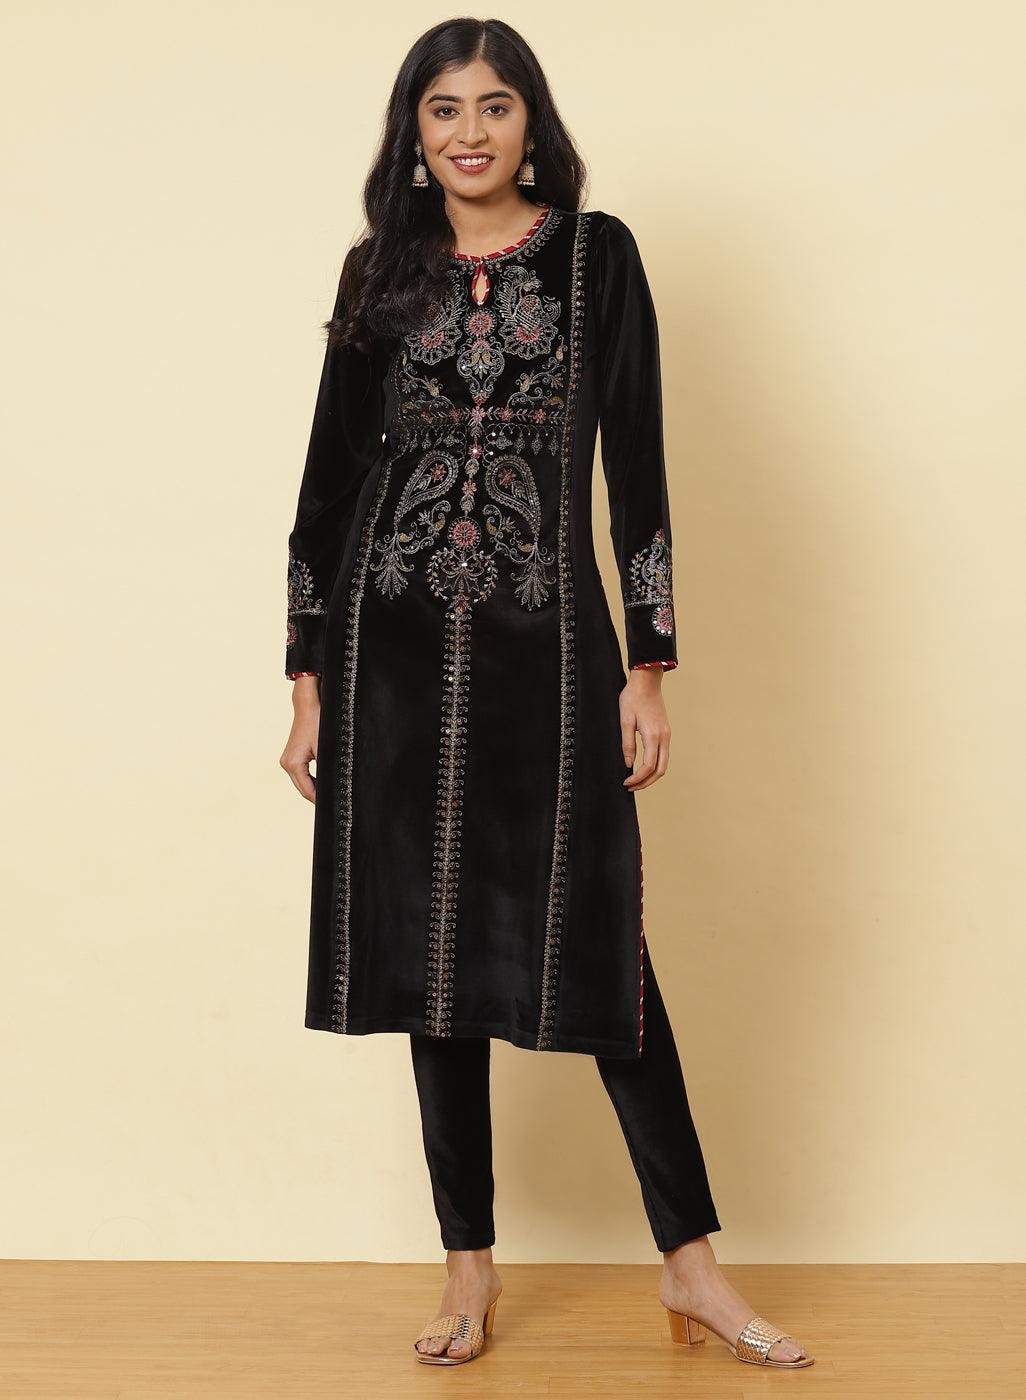 Black Jewel Embroidered Velvet Kurti With Salwar And Net Dupatta at Rs  6199.00 | ID: 2849323911712